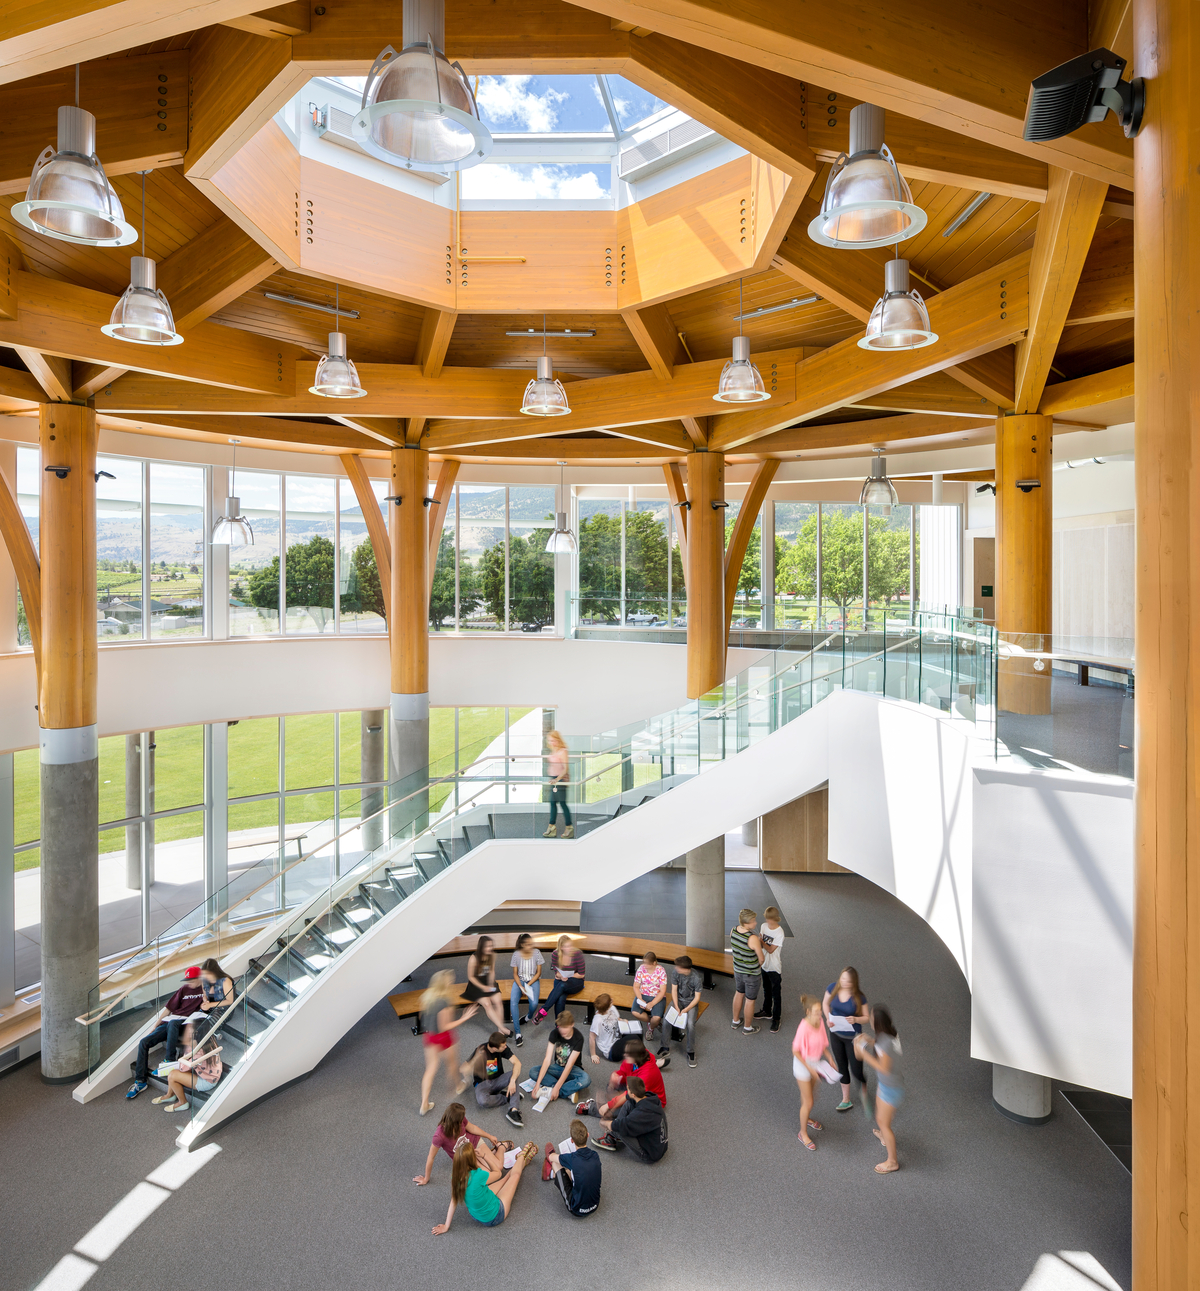 The mass timber ceiling of the Southern Okanagan Secondary School 3 storey atrium, including massive octagonal skylight, natural hewn pillars, and glue-laminated timbers are featured in this image